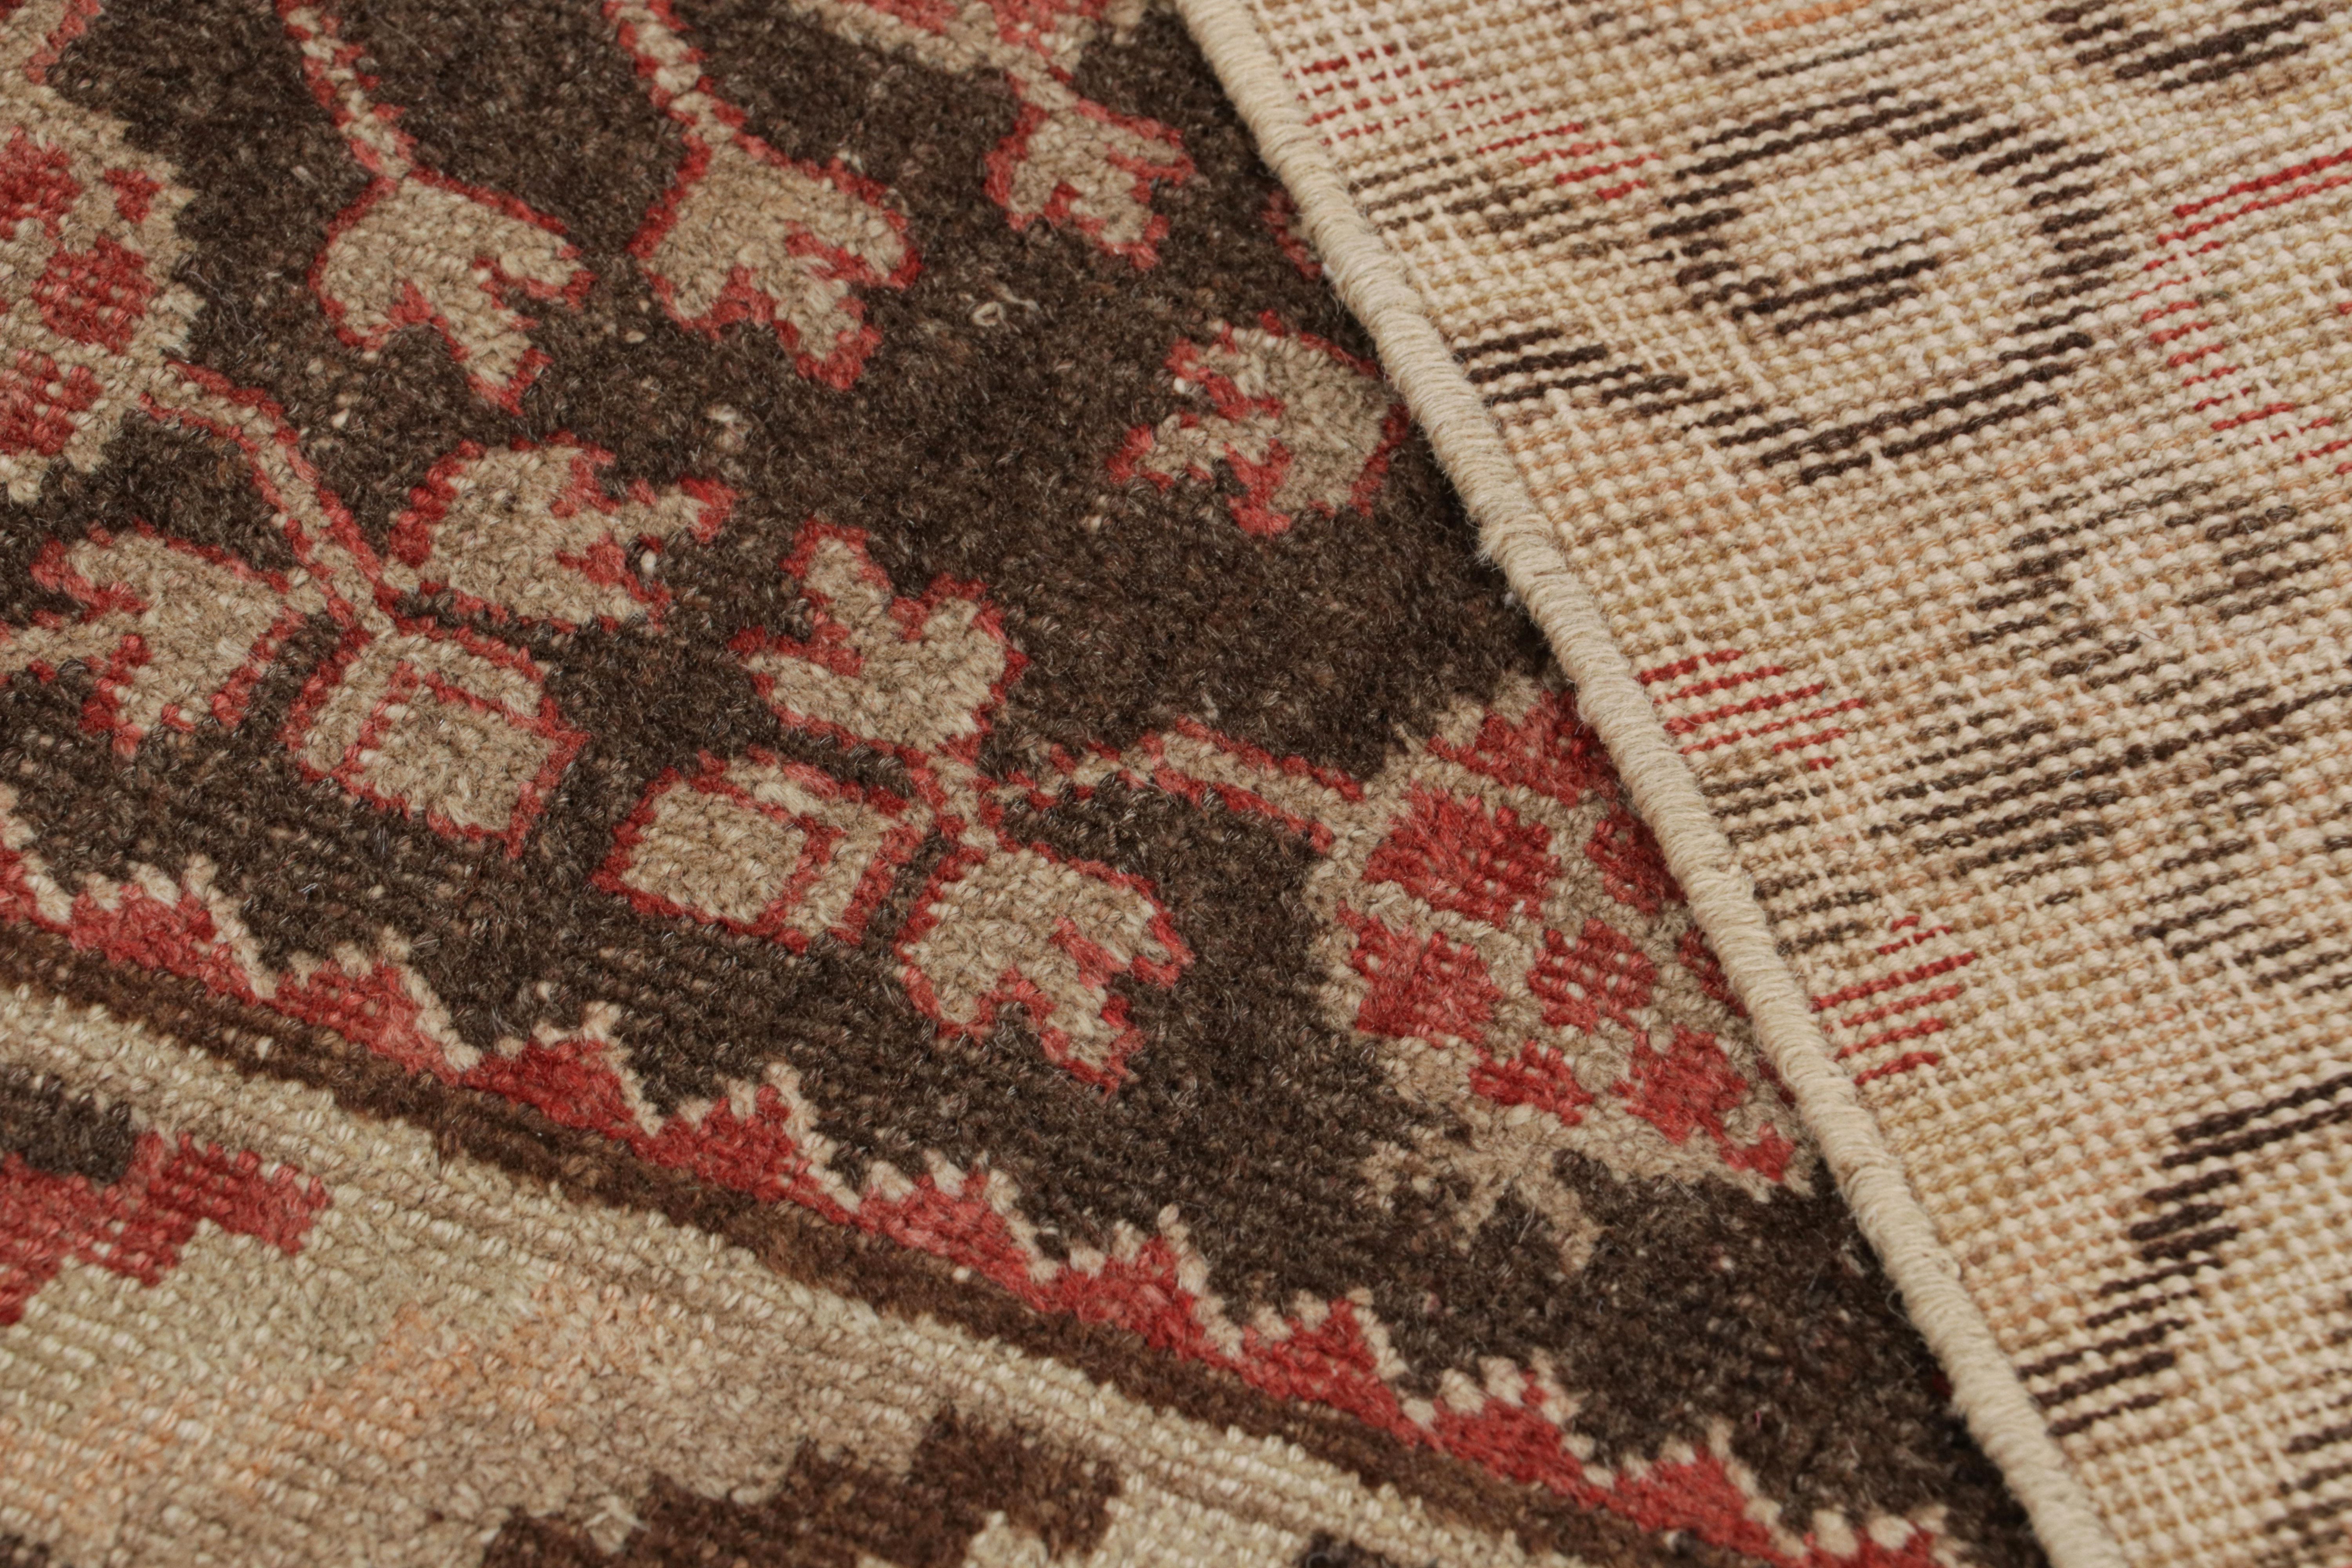 Wool Antique Khotan Rug Beige Brown and Red Pomegranate Pattern by Rug & Kilim For Sale